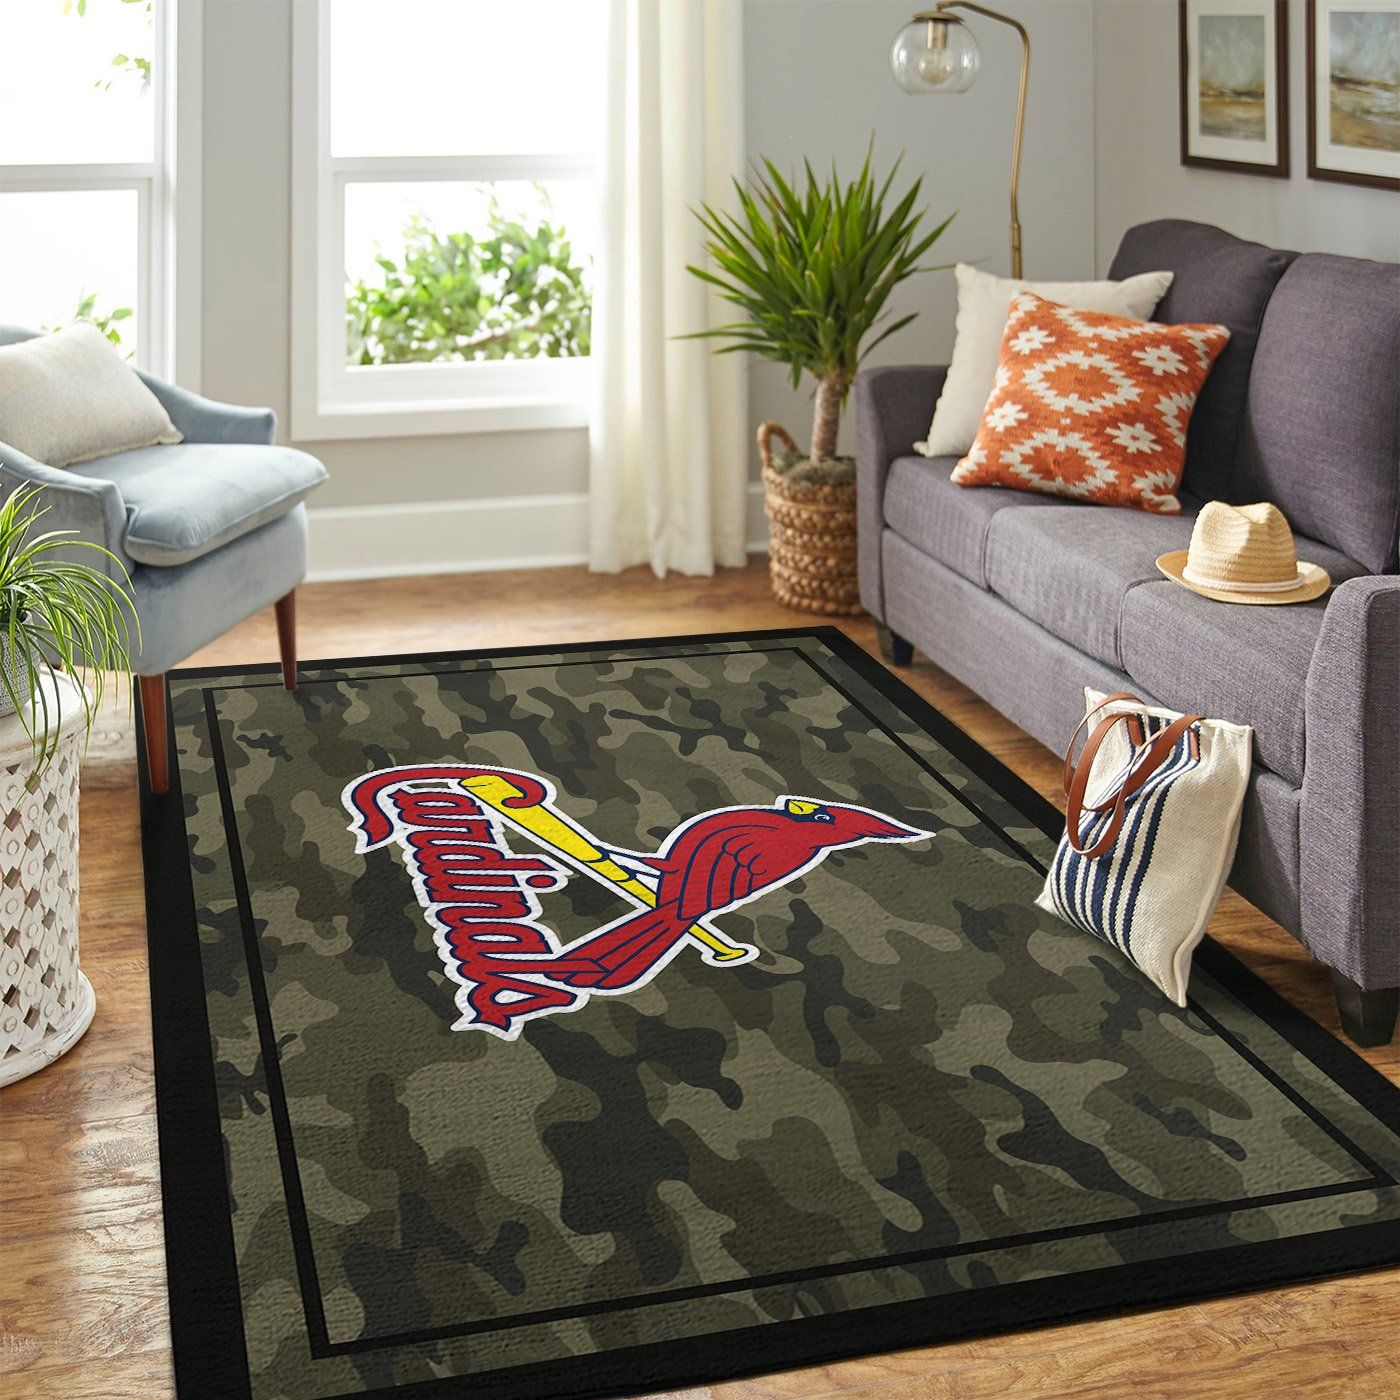 St Louis Cardinals Mlb Team Logo Camo Style Nice Gift Home Decor Area Rug  Rugs For Living Room - Travels in Translation